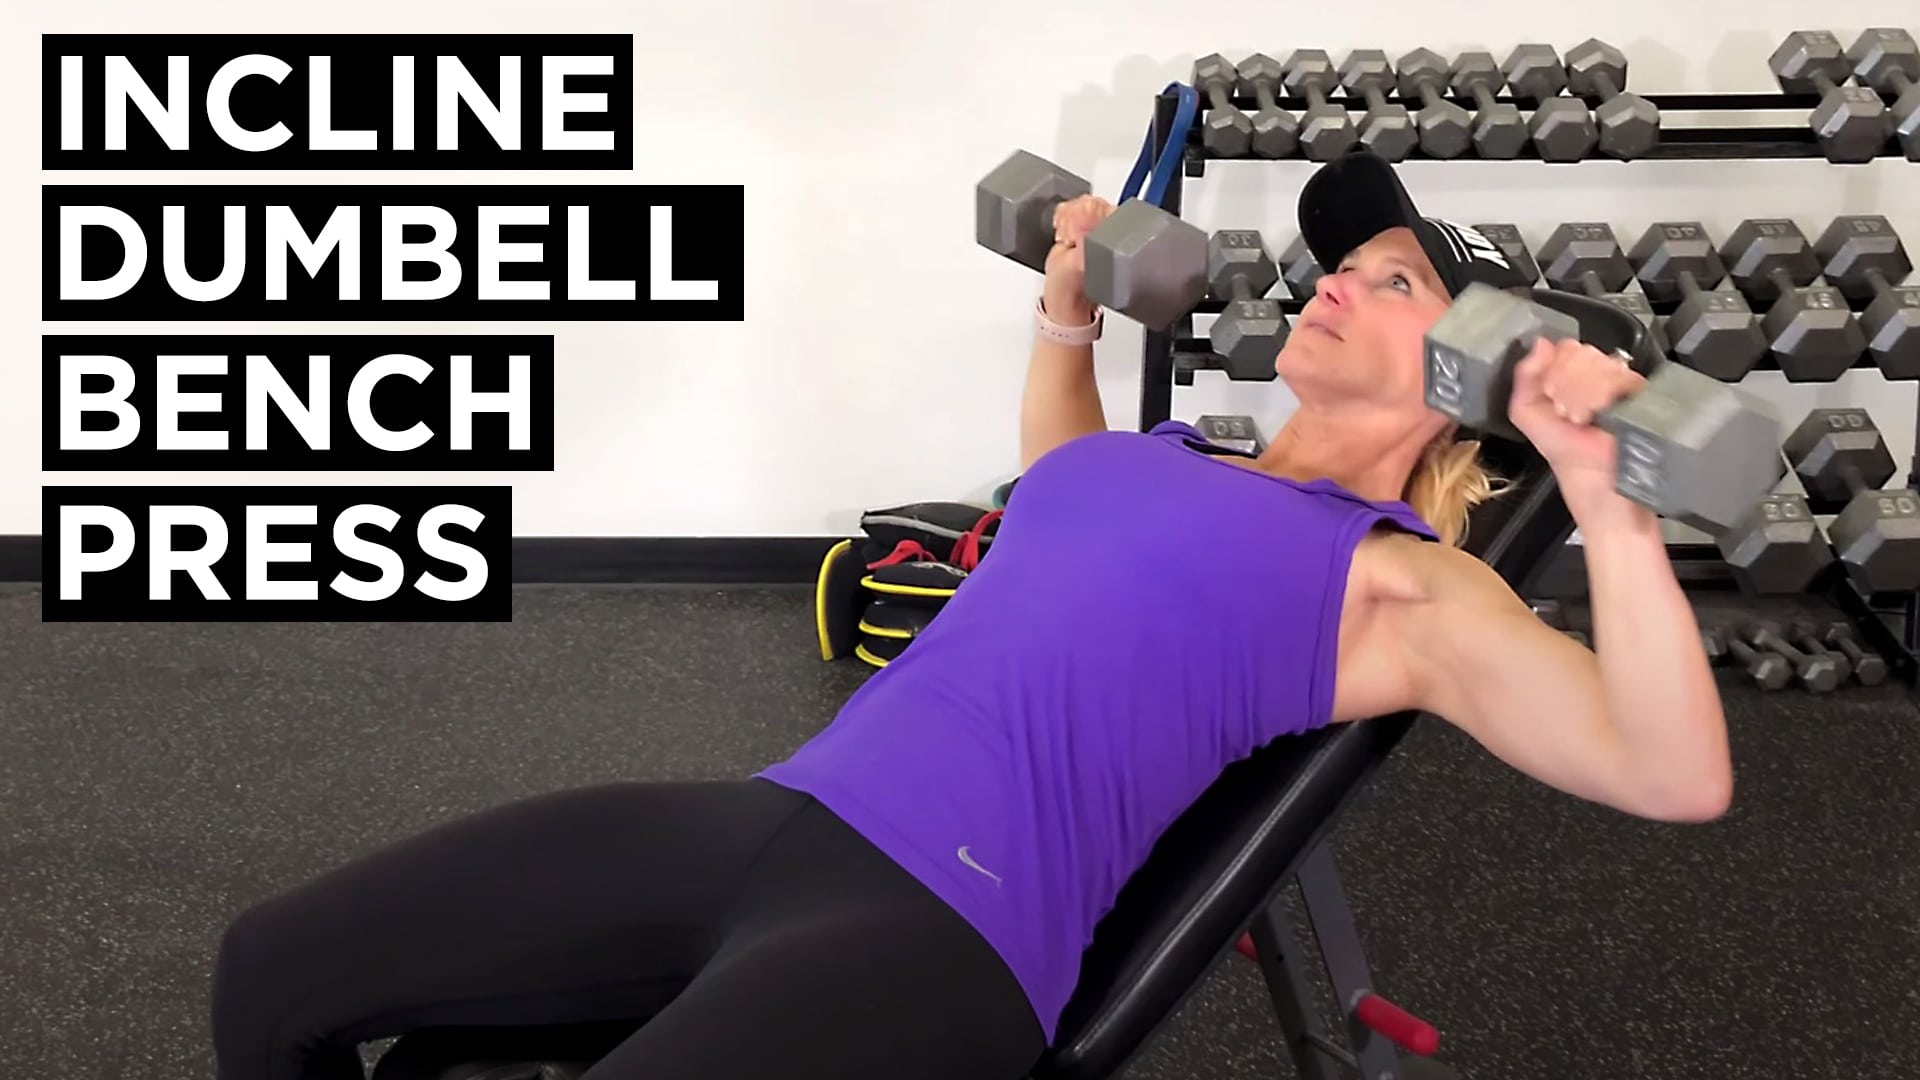 Incline Dumbbell Bench Press Exercise Description And Implementation